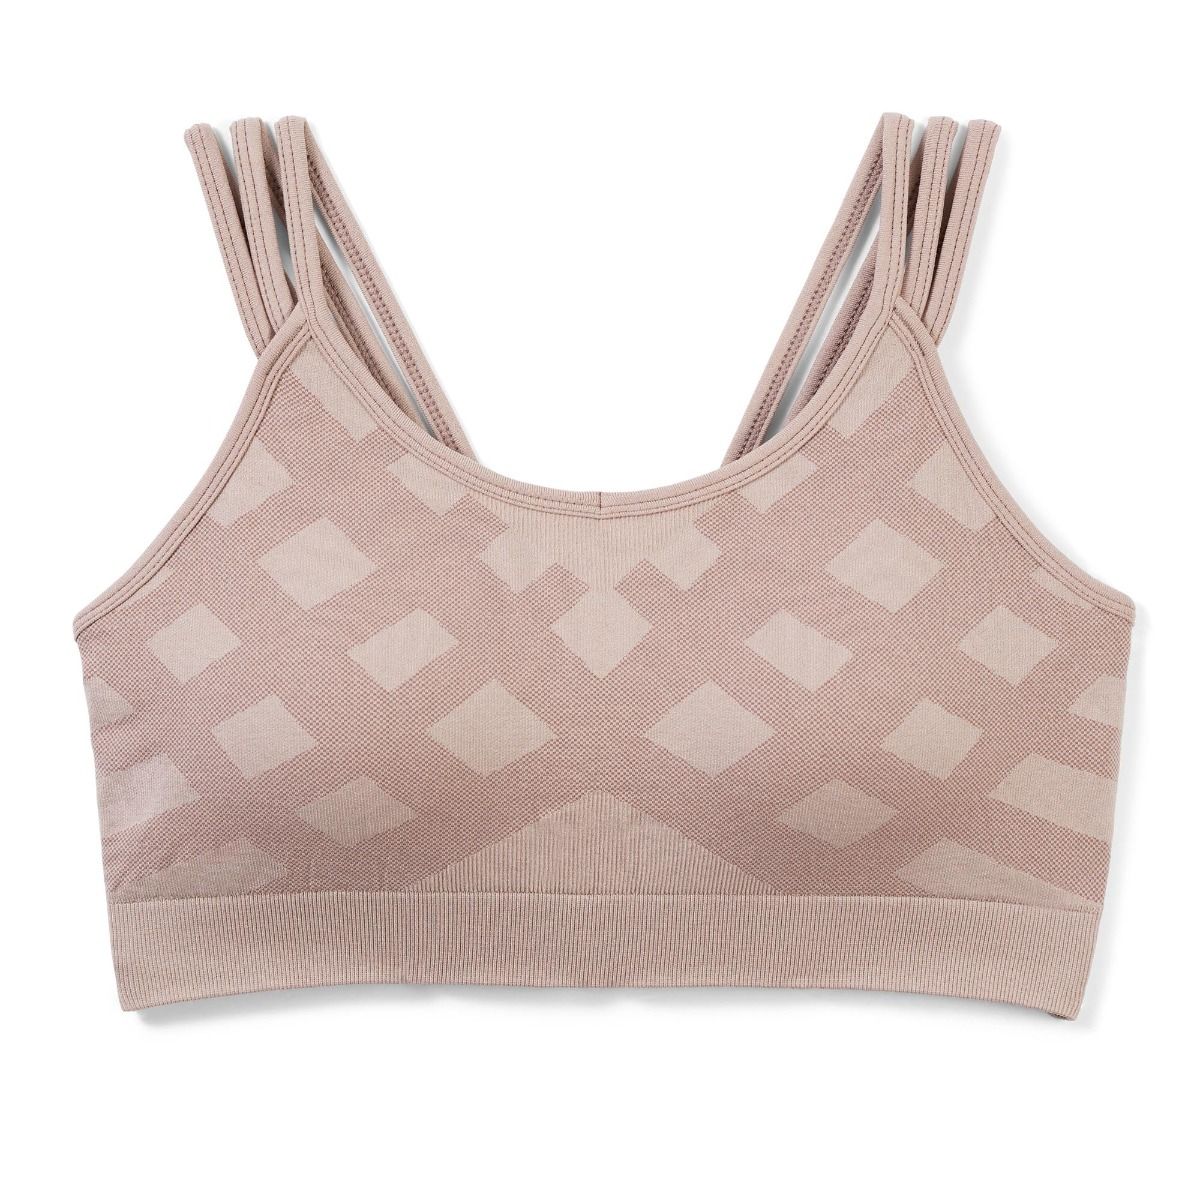  Sports Bras for Women Seamless Strappy Padded Sports